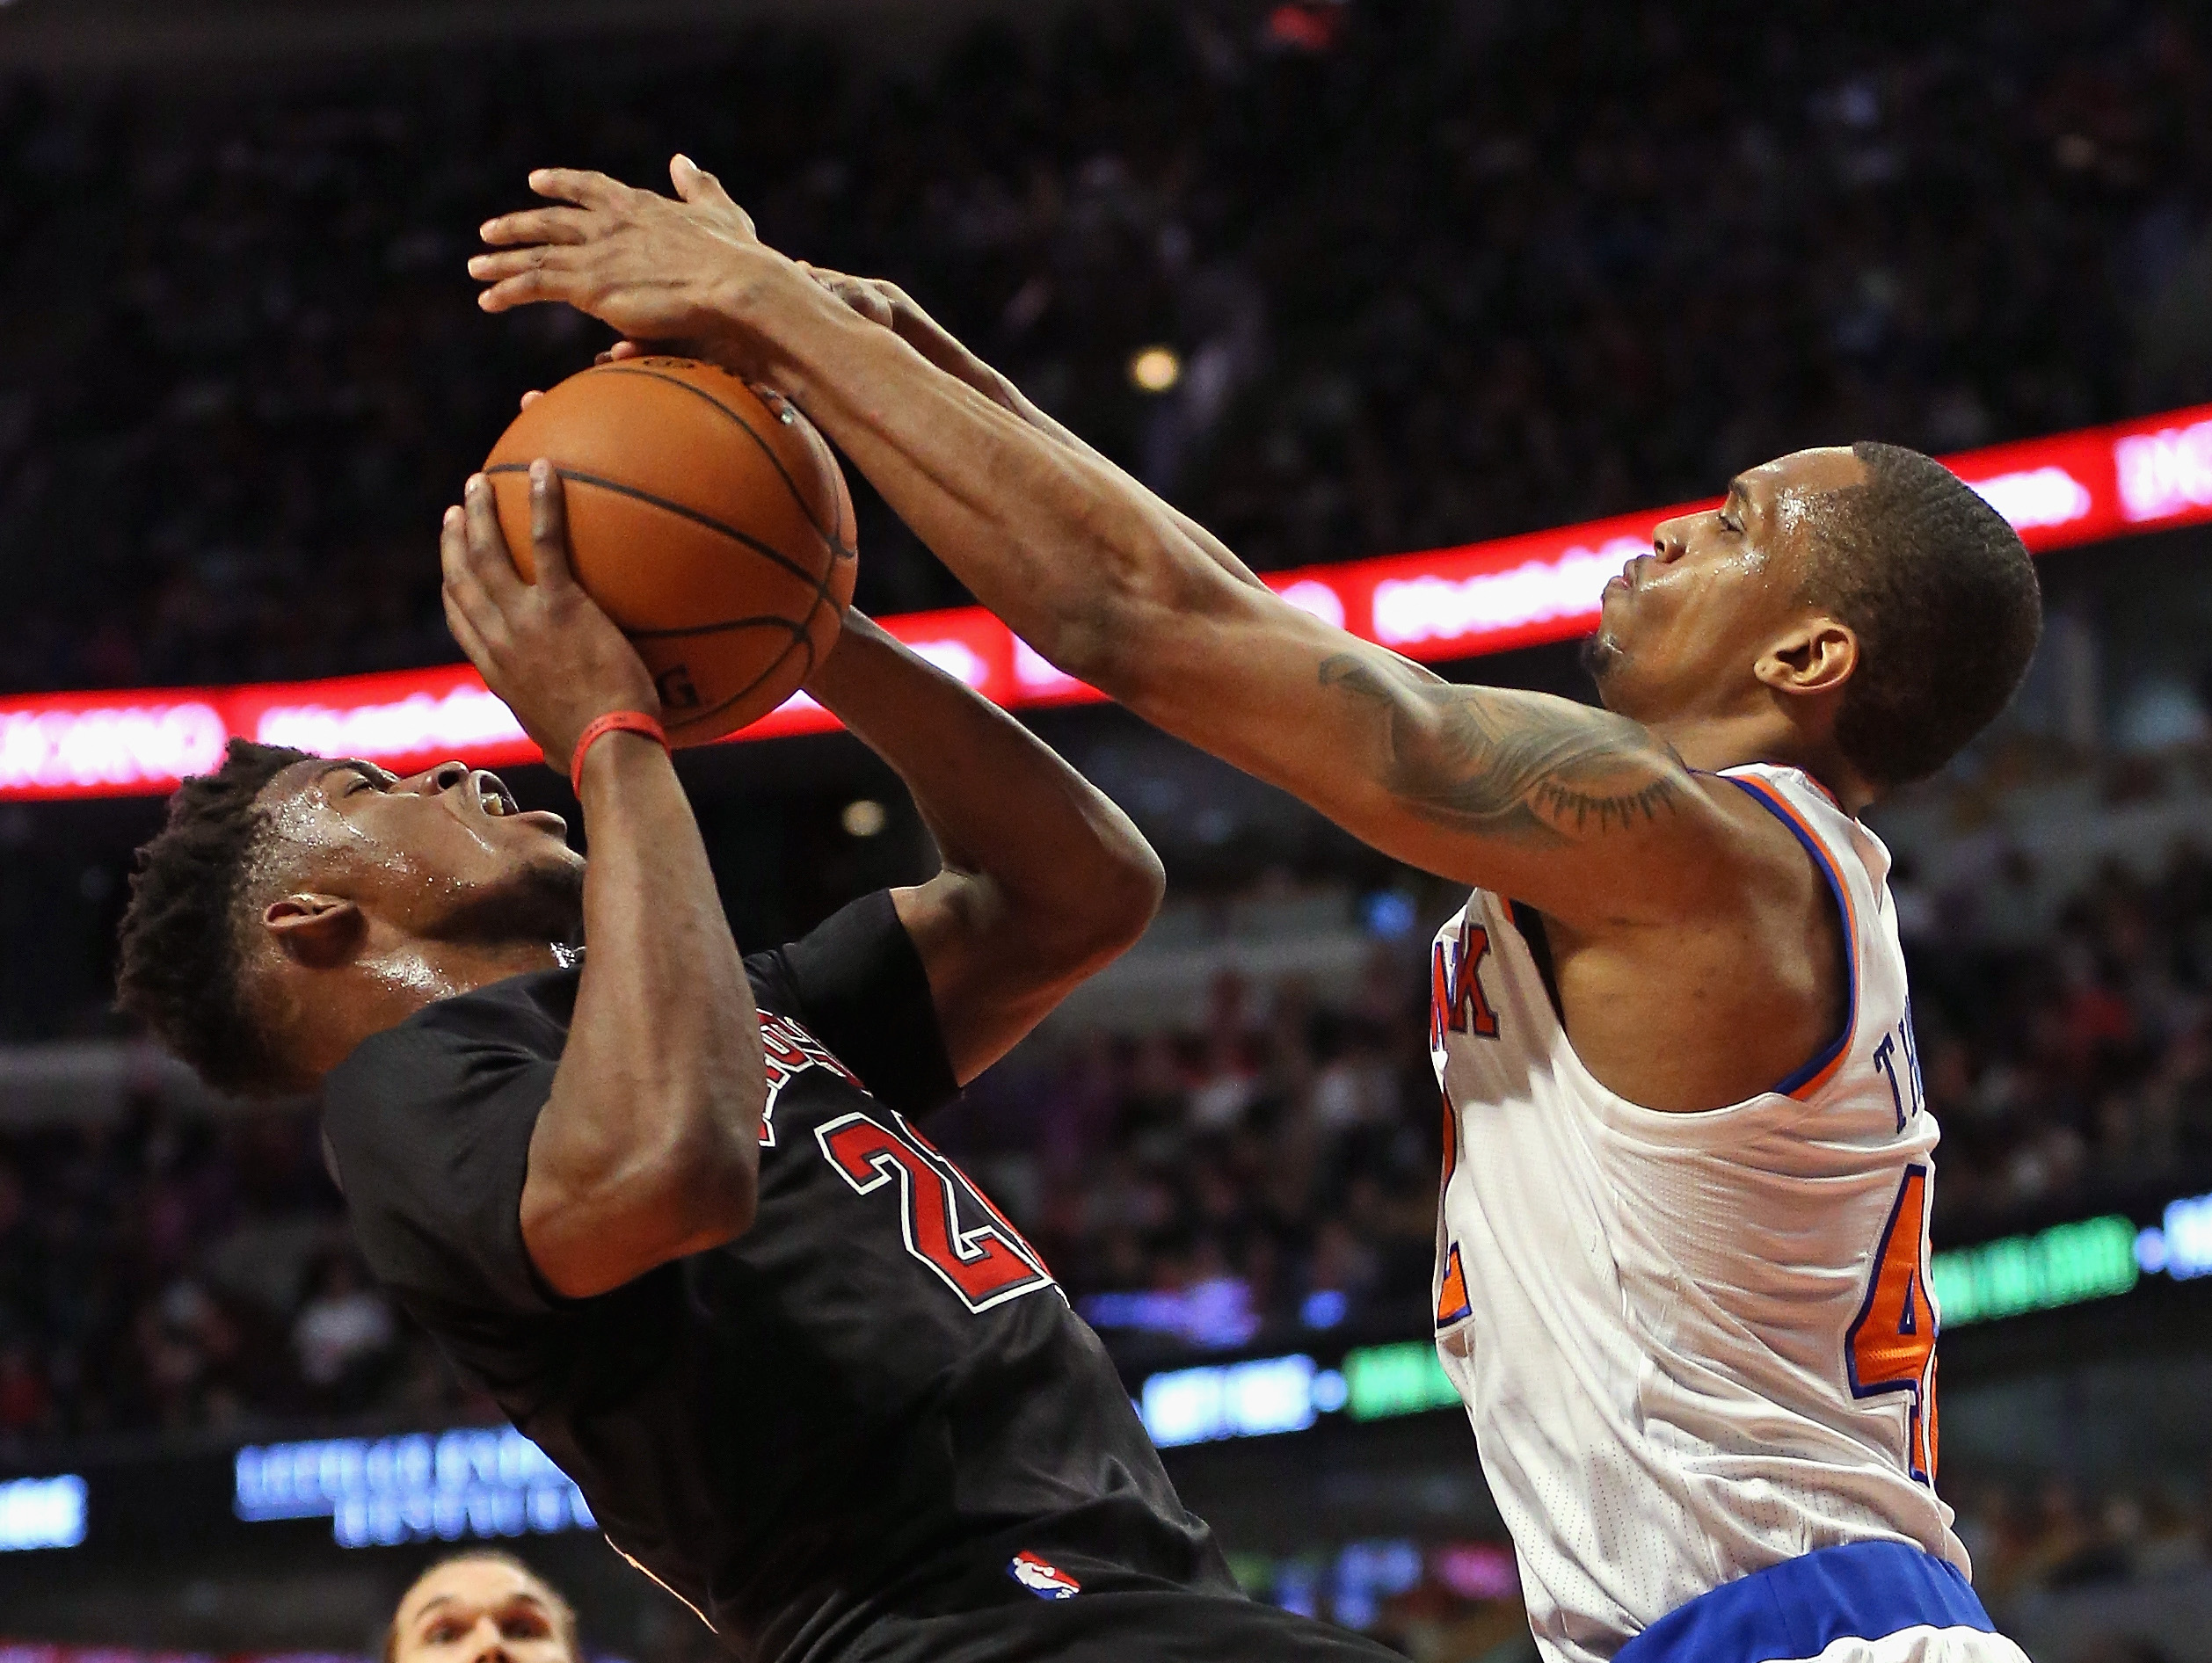 CHICAGO, IL - MARCH 28: Lance Thomas #42 of the New York Knicks stops Jimmy Butler #21 of the Chicago Bulls from getting off a shot at the United Center on March 28, 2015 in Chicago, Illinois. The Bulls defeated the Knicks 111-80. NOTE TO USER: User expressly acknowledges and agrees that, by downloading and or using this photograph, User is consenting to the terms and conditions of the Getty Images License Agreement. (Photo by Jonathan Daniel/Getty Images)